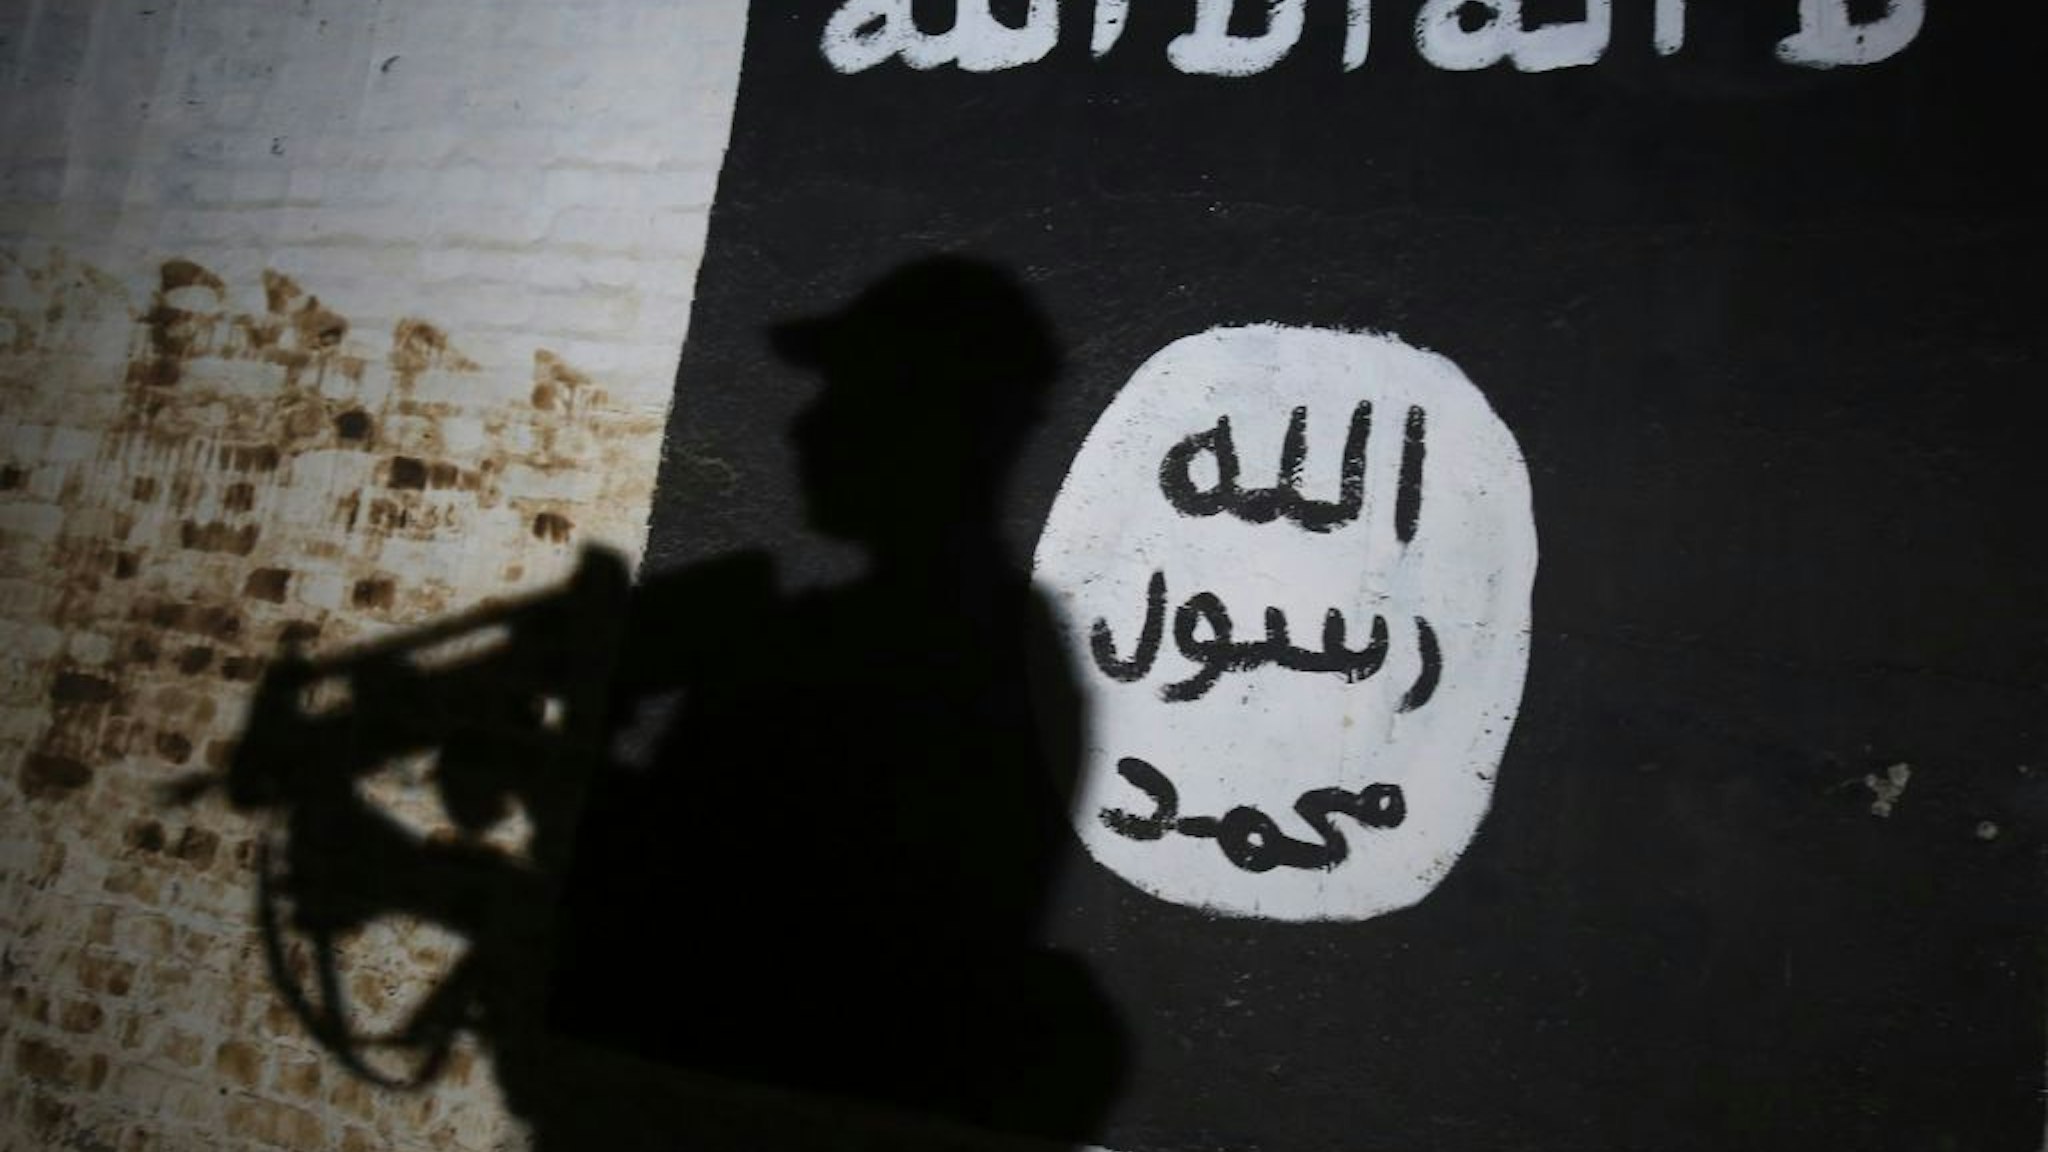 TOPSHOT - A member of the Iraqi forces walks past a mural bearing the logo of the Islamic State (IS) group in a tunnel that was reportedly used as a training centre by the jihadists, on March 1, 2017, in the village of Albu Sayf, on the southern outskirts of Mosul. Iraqi forces launched a major push on February 19 to recapture the west of Mosul from the Islamic State jihadist group, retaking the airport and then advancing north. / AFP PHOTO / AHMAD AL-RUBAYE (Photo credit should read